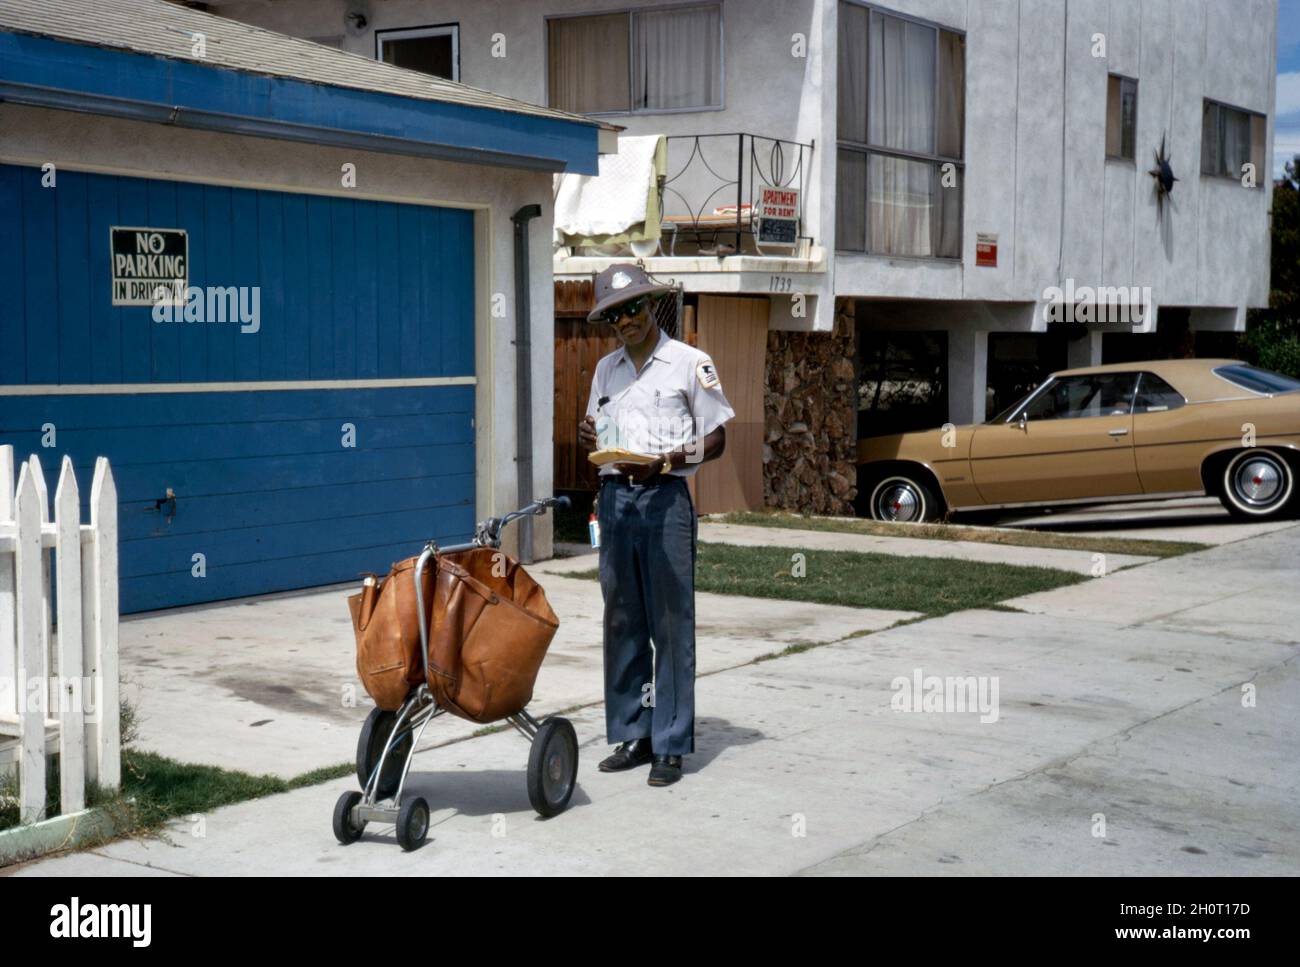 An Afro-American postman delivering the US mail in suburban Long Beach, California, USA in 1972. He has with him a stylish, leather 4-wheeled, push hand-cart or trolley. A wide-brimmed, sun protection hat is part of the uniform. A mail carrier, mailman, mailwoman, postal carrier, postman, postwoman, or letter carrier is an employee of a post office or postal service. The United States Postal Service (USPS, the Post Office, US Mail, or Postal Service) is an agency of the federal government. This image is from an old American Kodak amateur colour transparency – a vintage 1970s photograph. Stock Photo